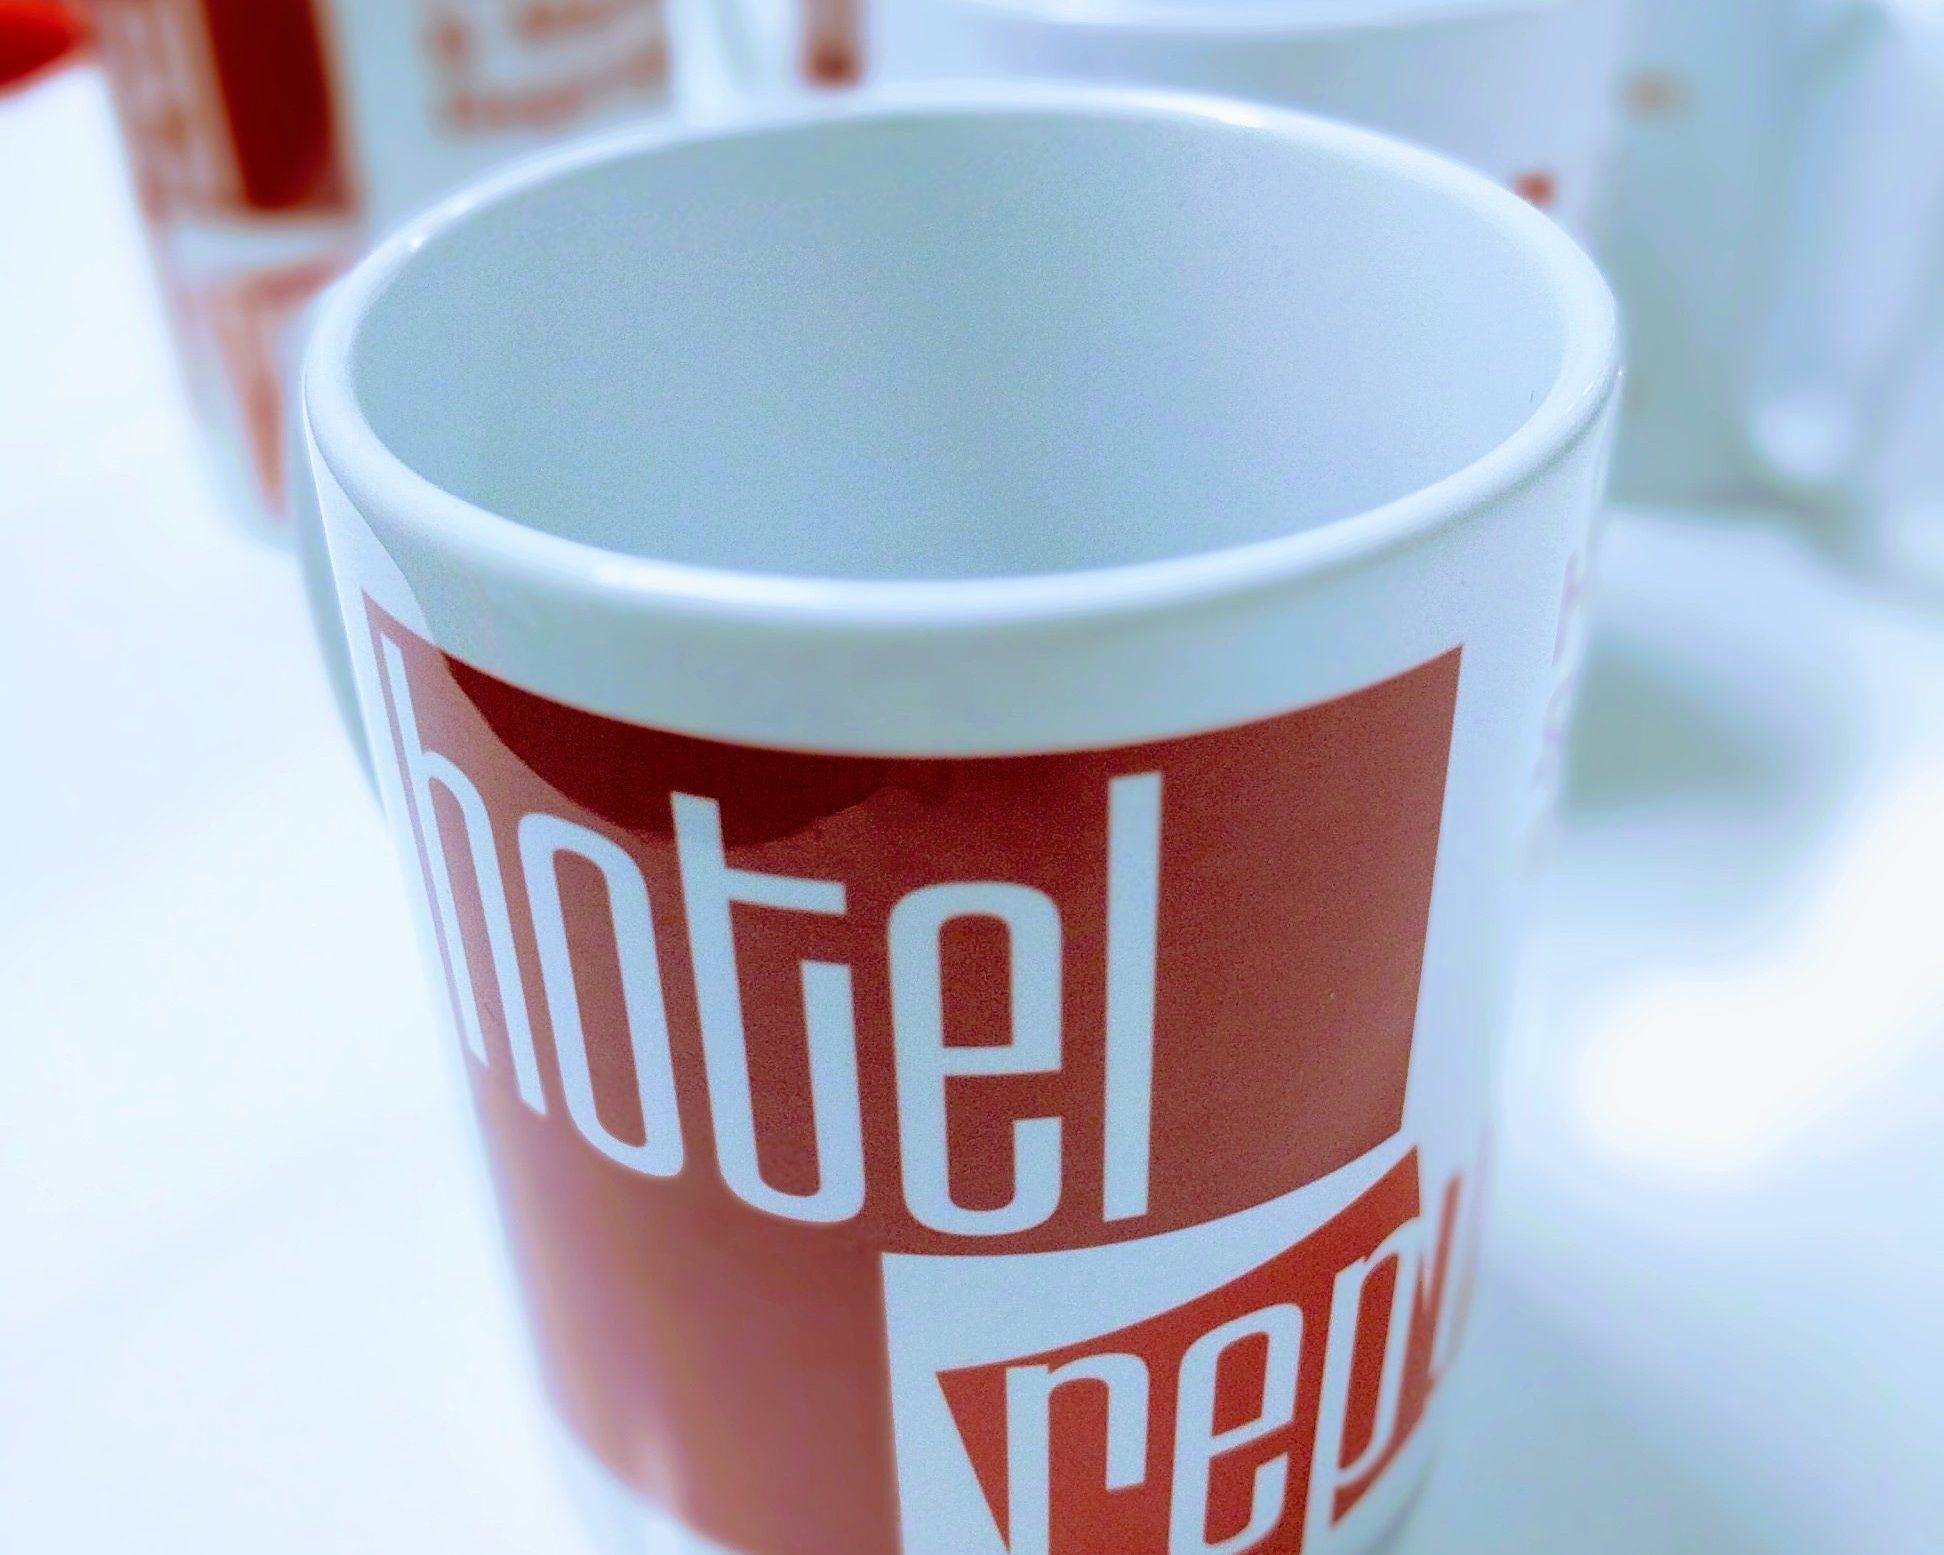 Spend A Day With…hotel republic